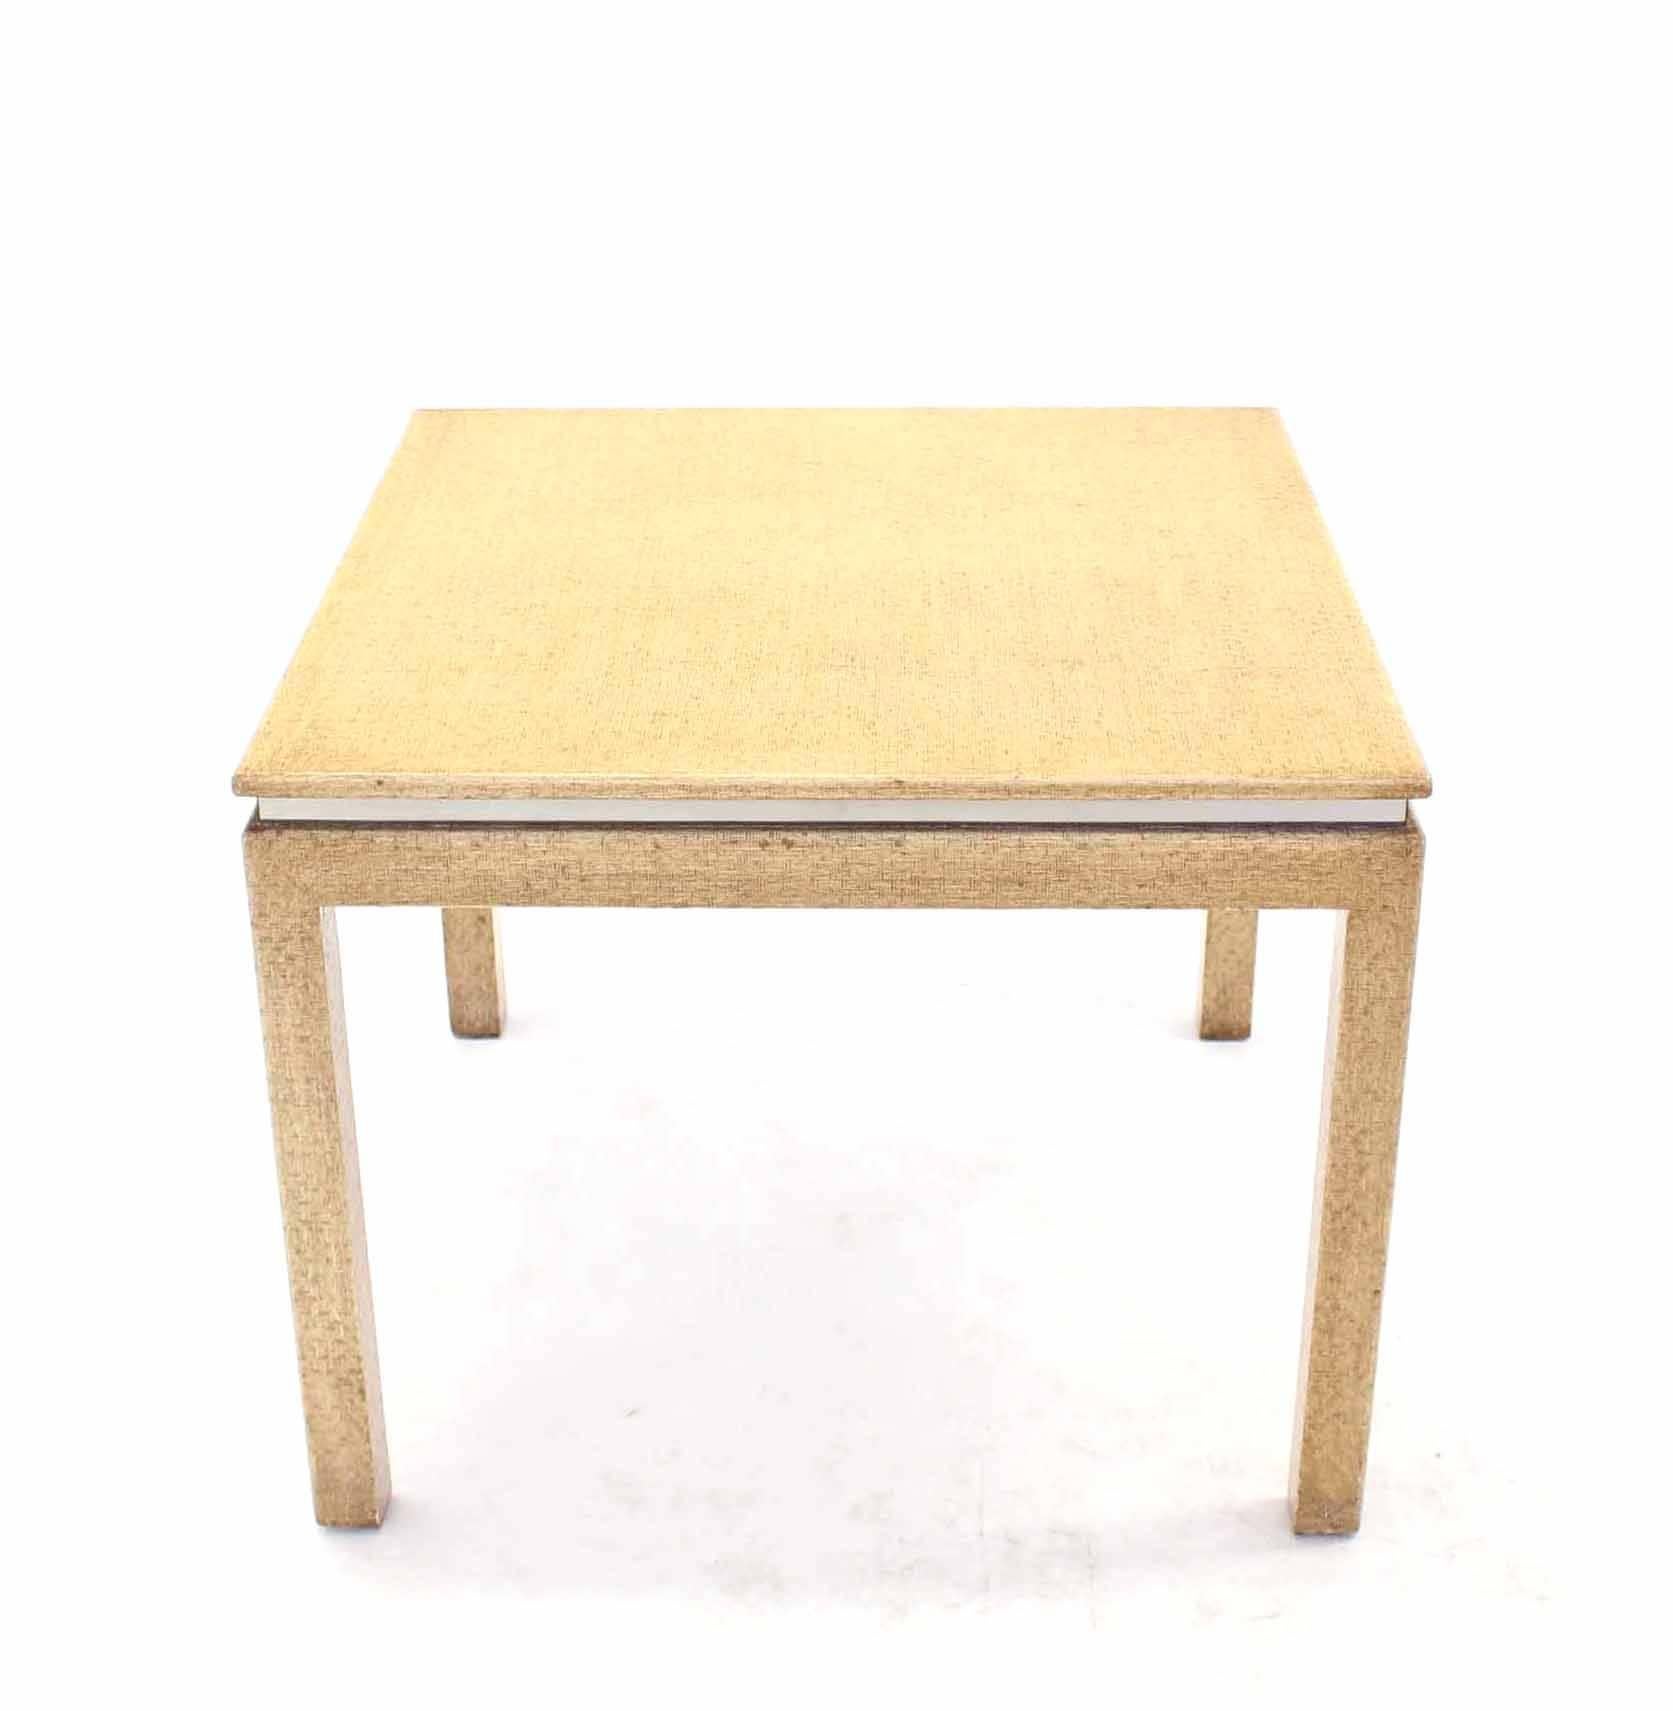 Nice Mid-Century Modern grass cloth square game table.